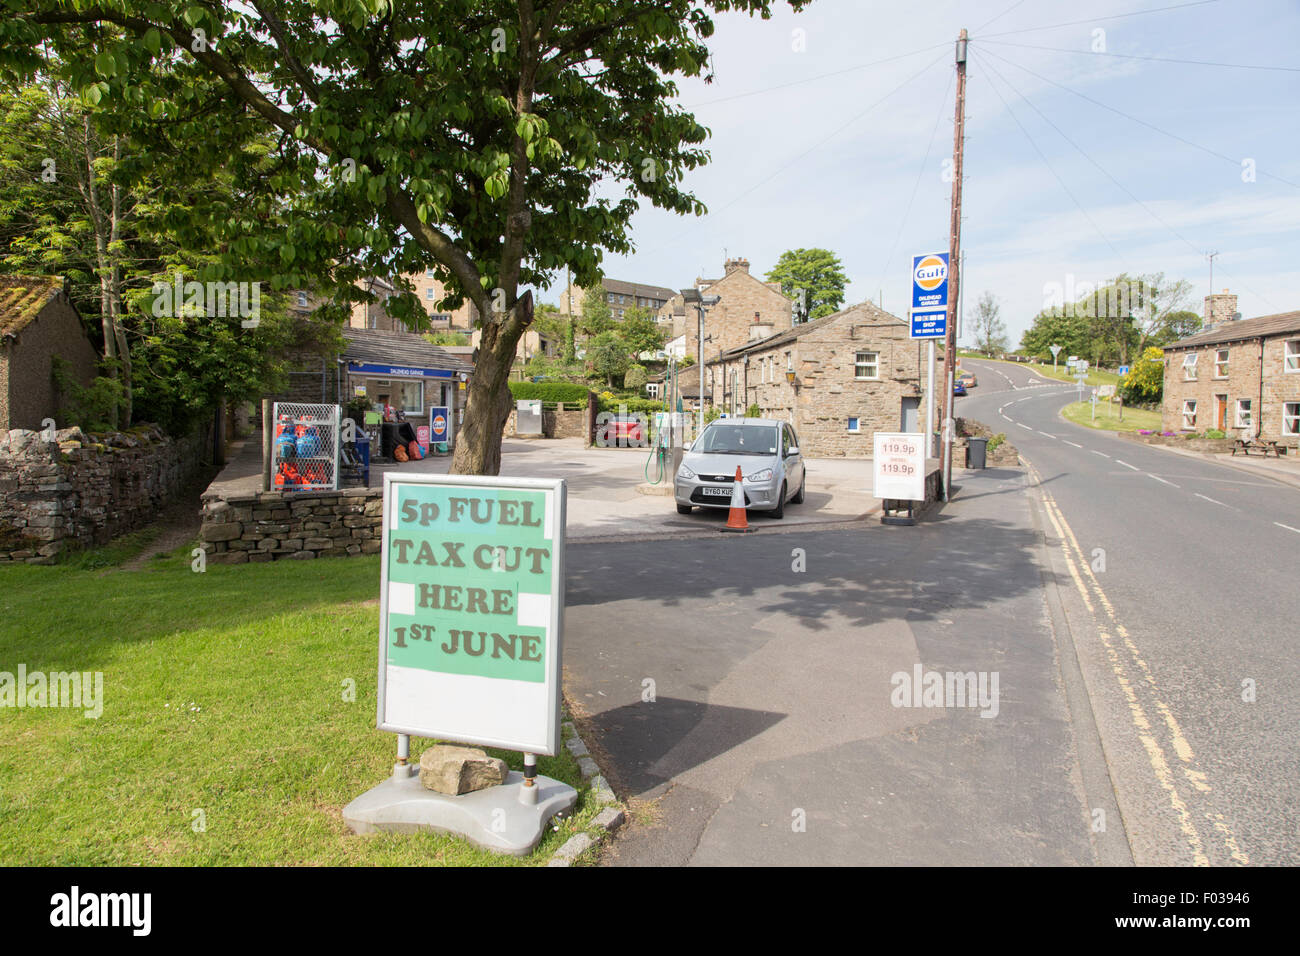 Remote rural petrol station advertising the 5p fuel cut, Hawes, Yorkshire Dales National Park, North Yorkshire, England, UK Stock Photo